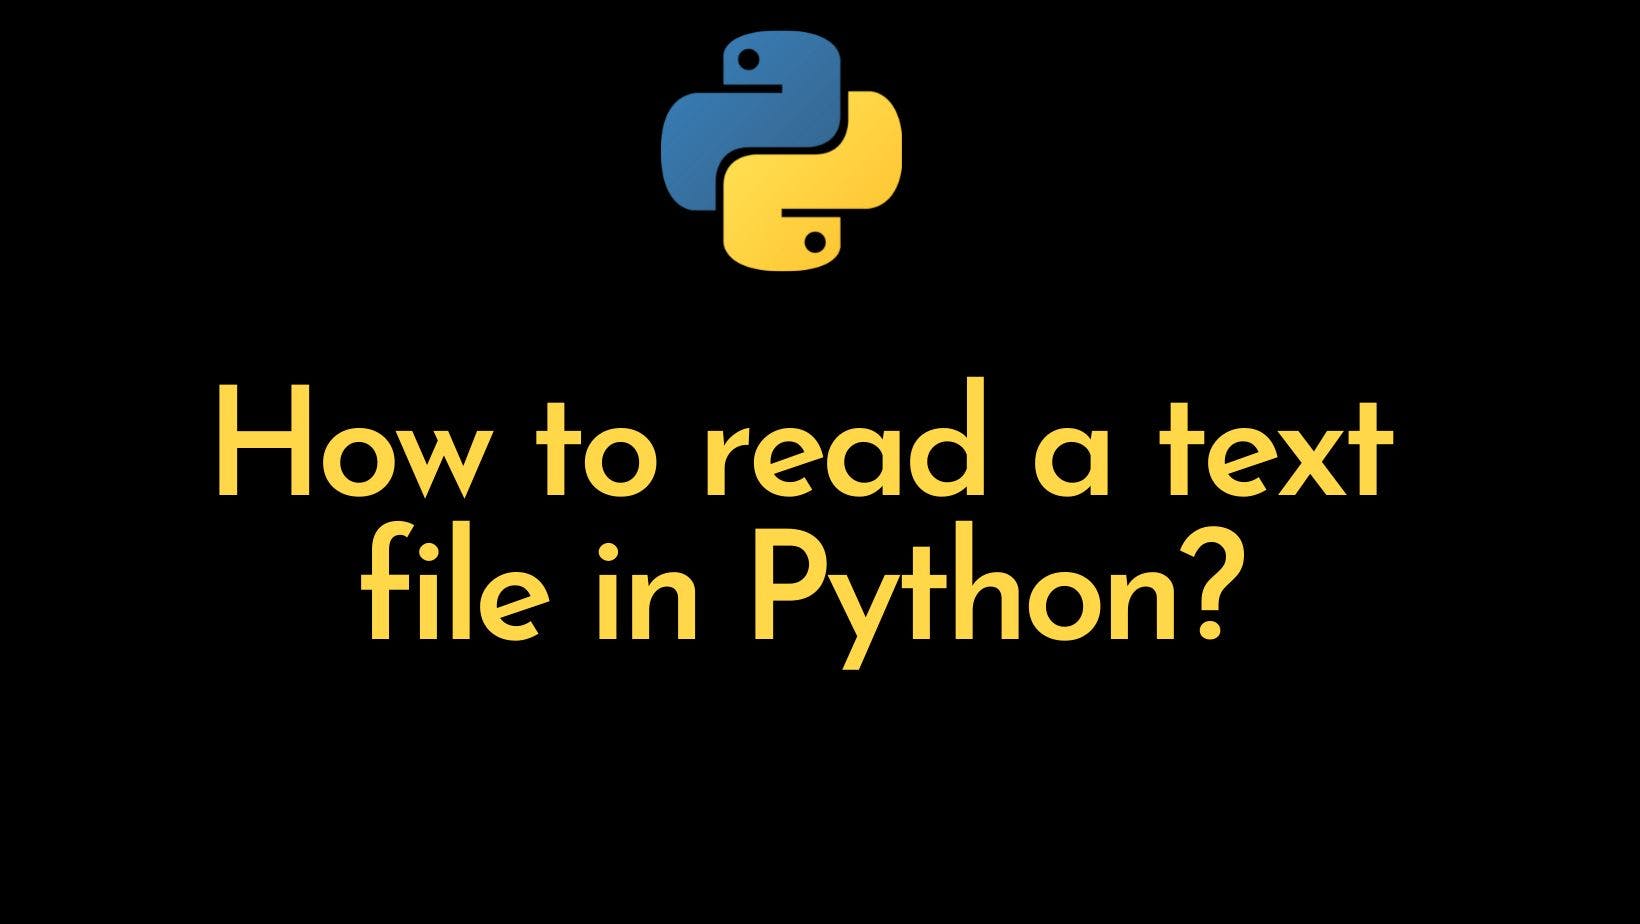 Creating Files in Python: Step-by-Step Tutorial